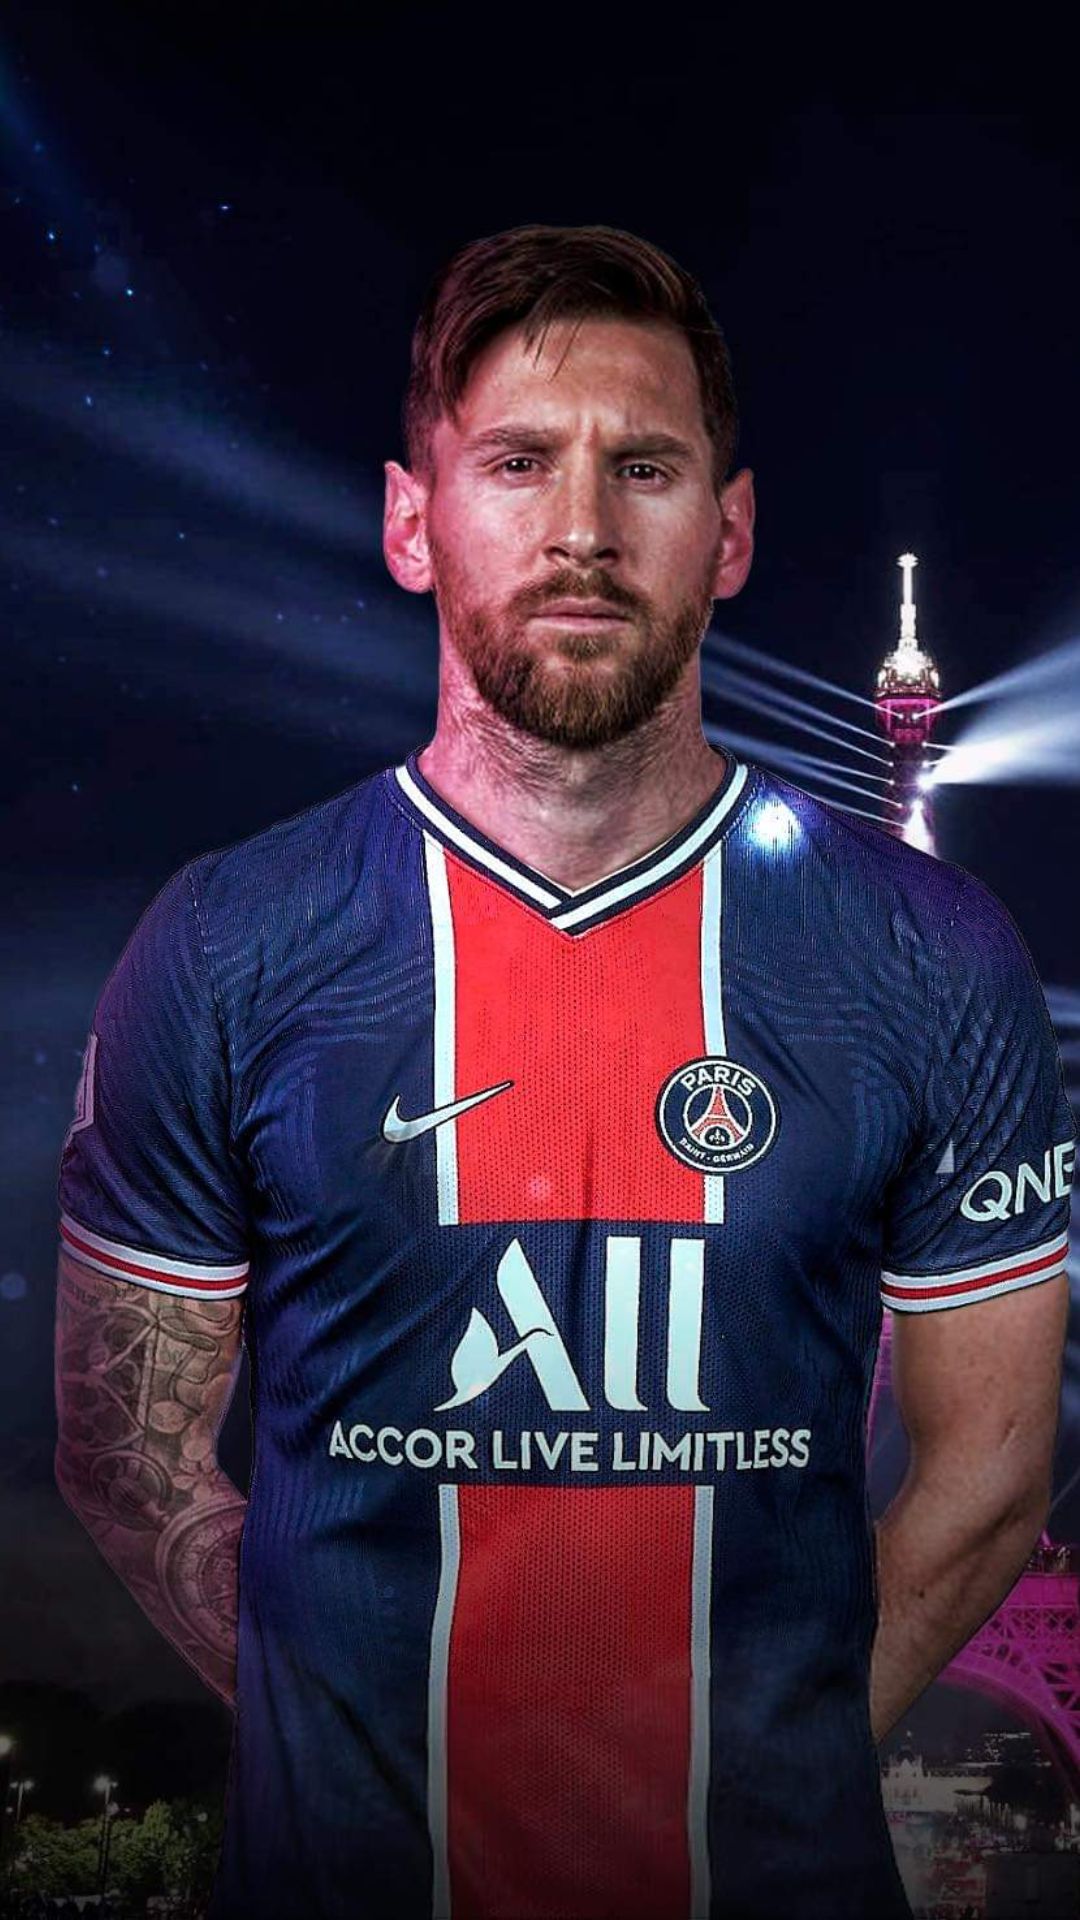 Free download Lionel Messi PSG Wallpapers Top Best Messi PSG ...